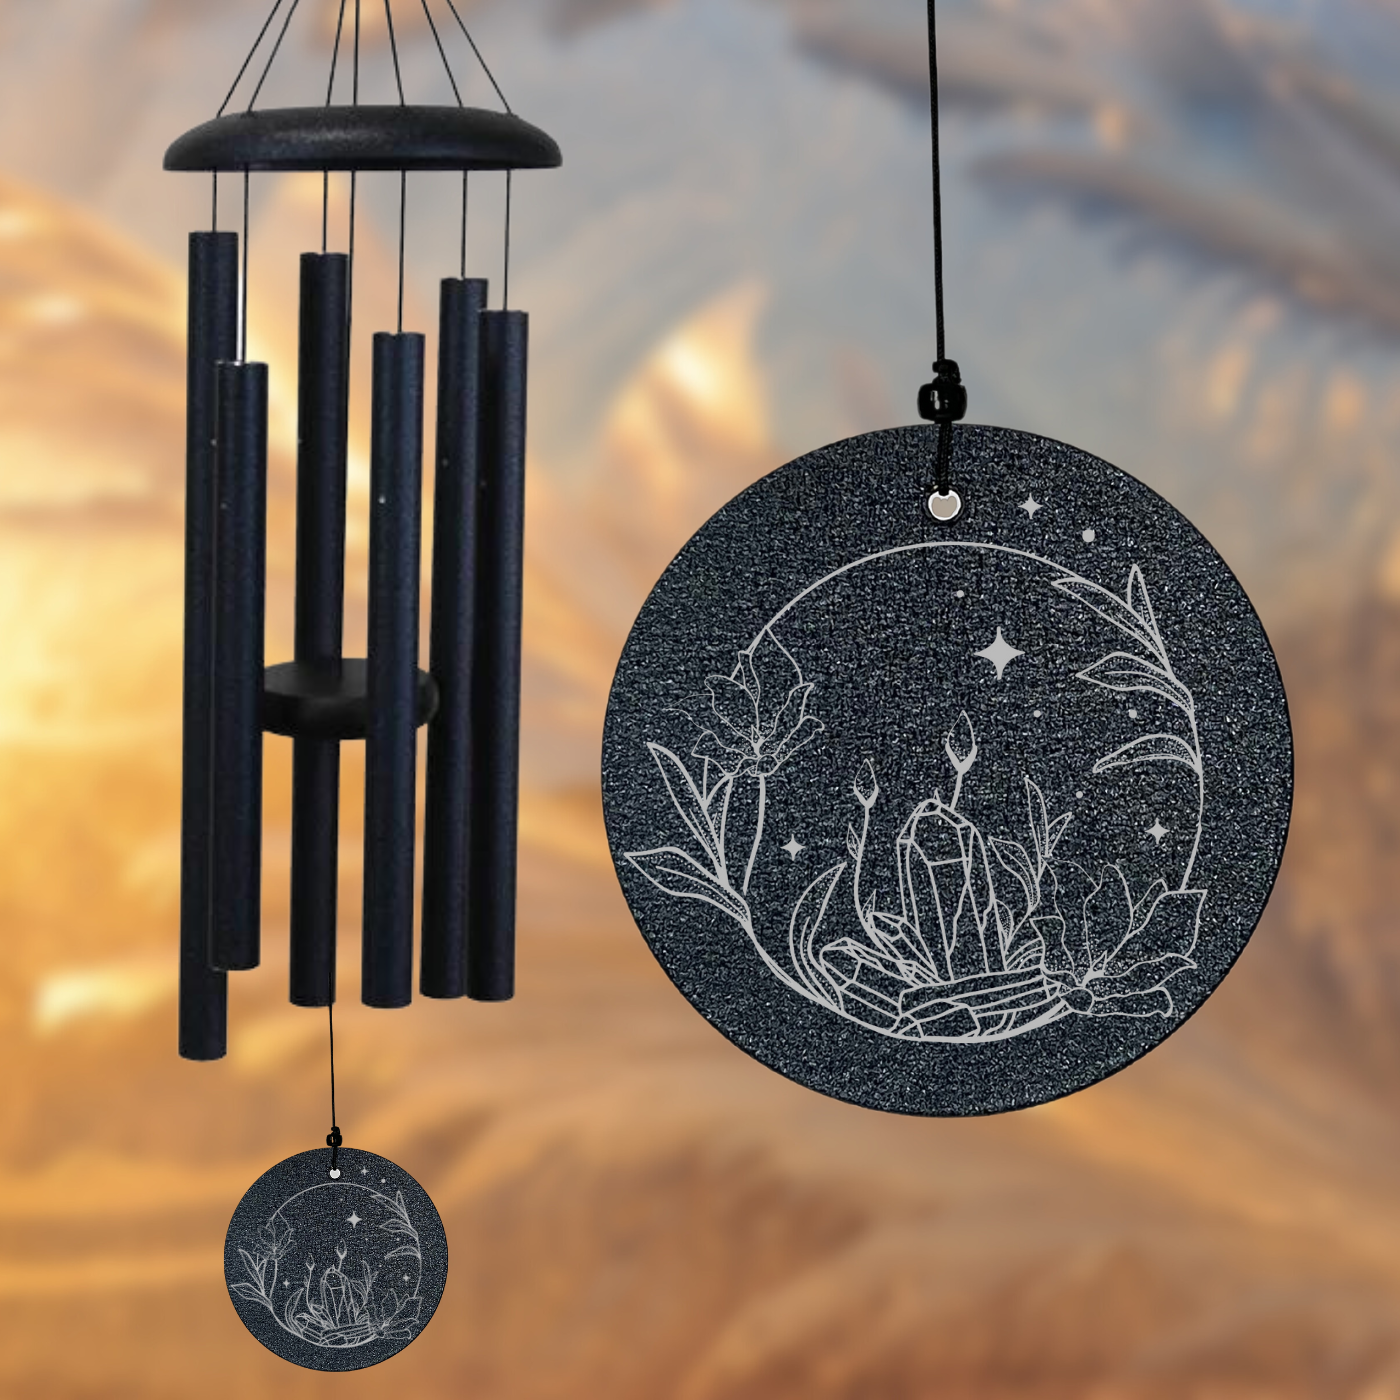 CORINTHIAN BELLS MIDNIGHT BLUE CRYSTAL CIRCLE WIND CHIME - SCALE OF A